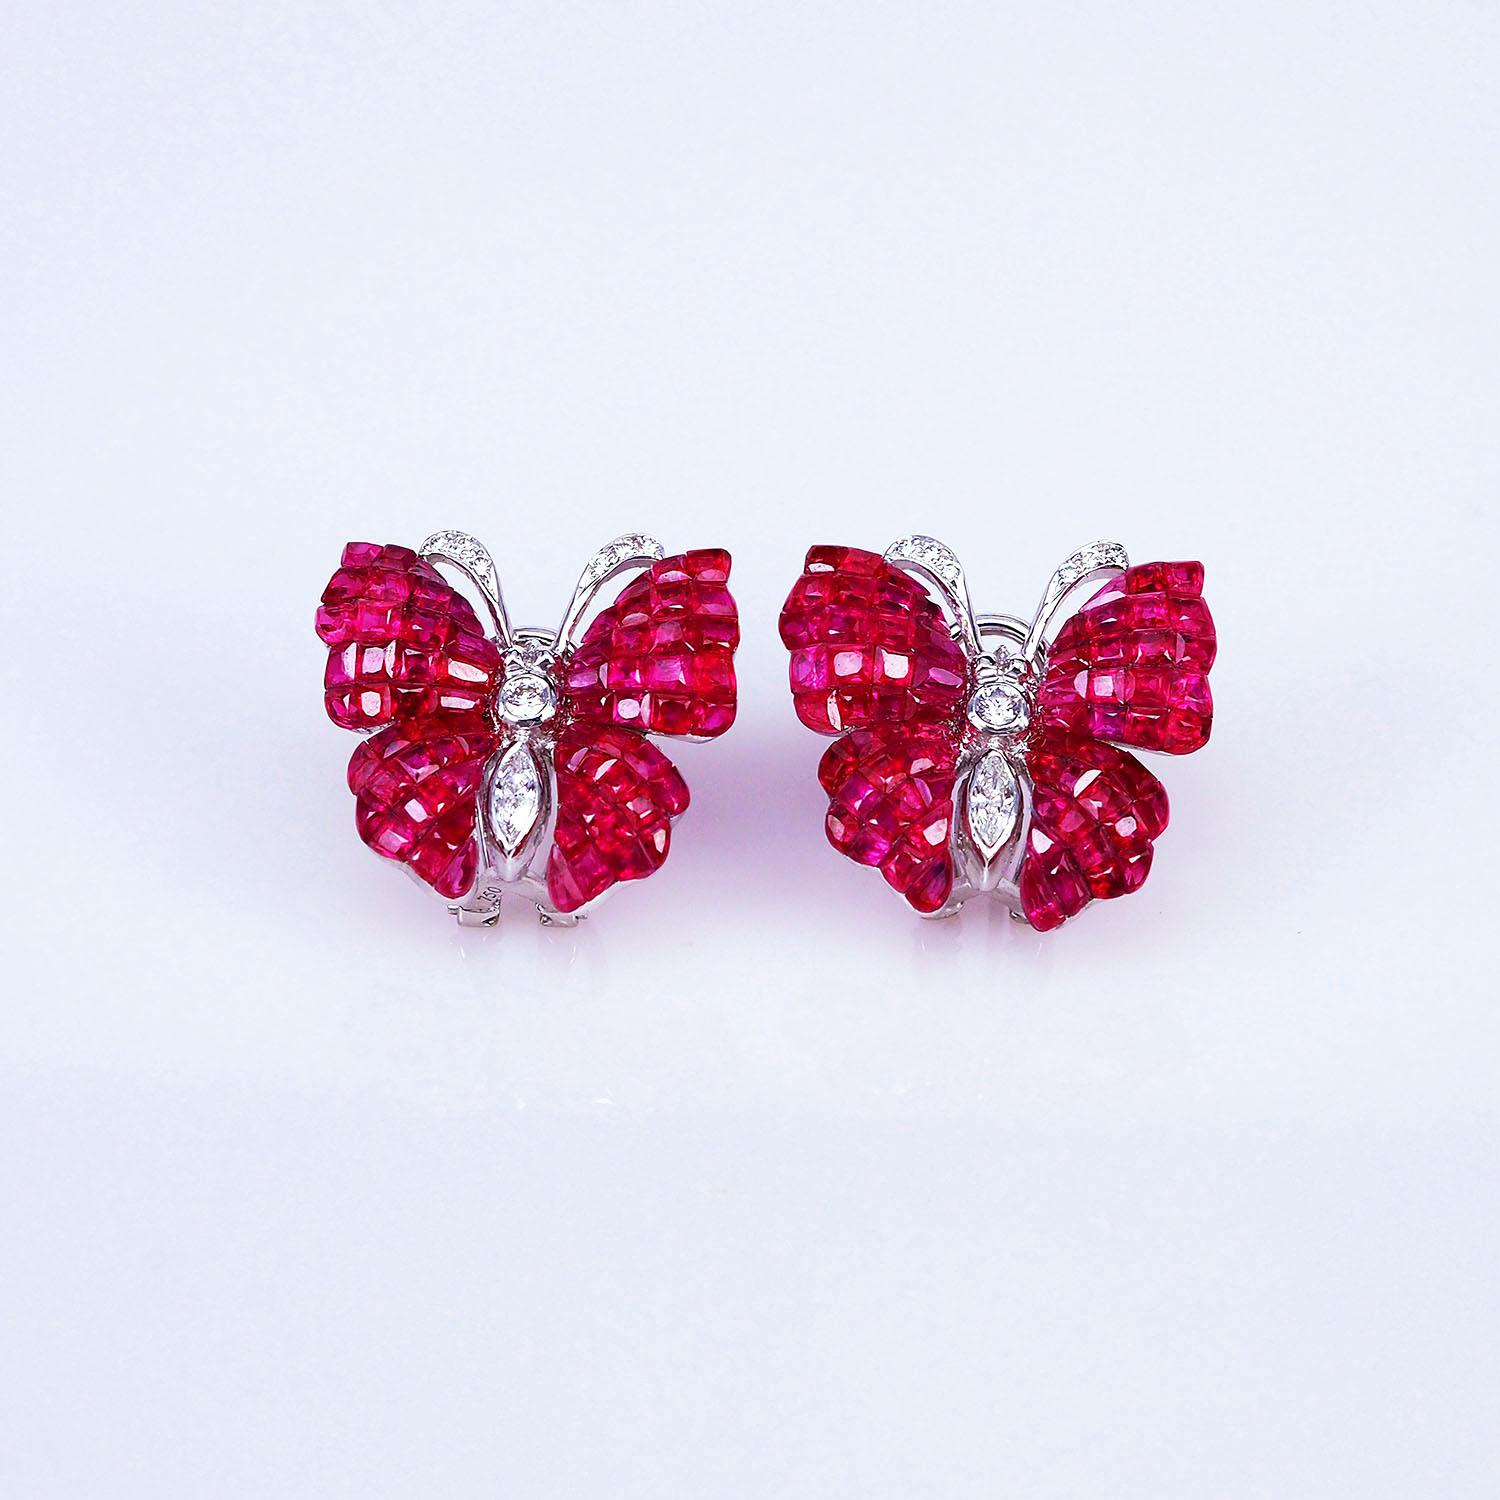 The top quality ruby which make in invisible setting. We set the stone in perfection as we are professional in this kind of setting more than 40 years. The invisible is a highly technique .We cut and groove every stone .Therefore; we can guarantee